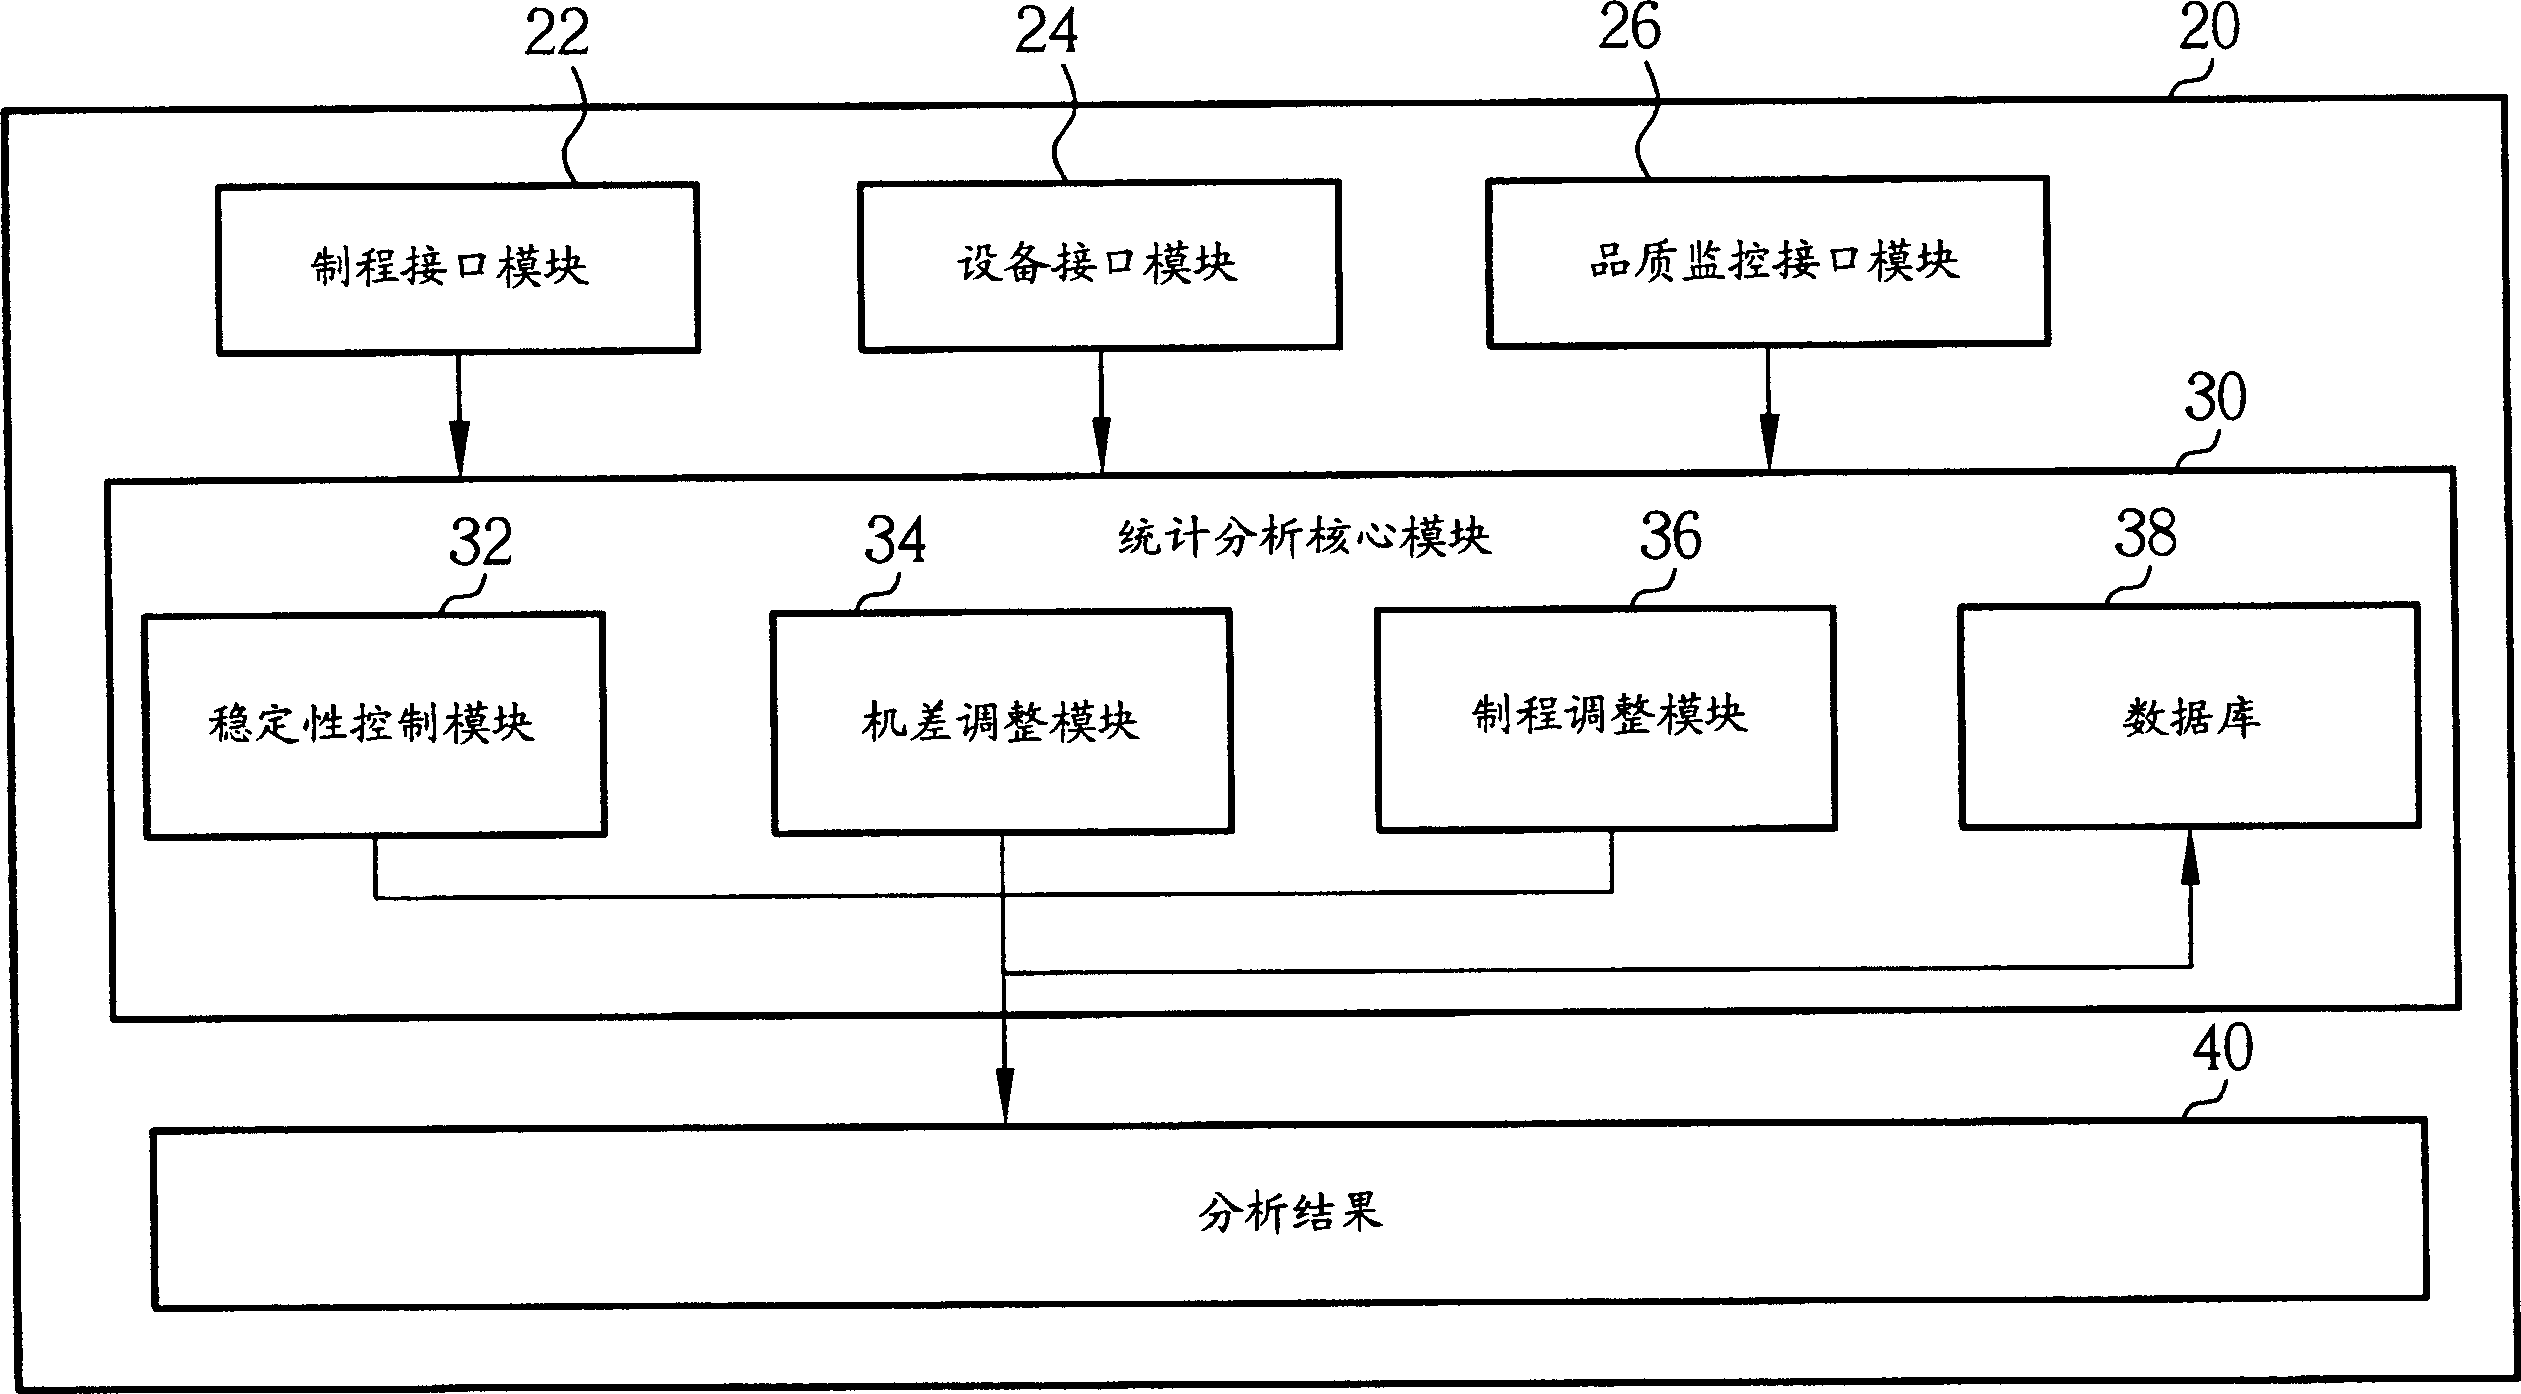 Method for early stage mobile management of semiconductor equipment and related system